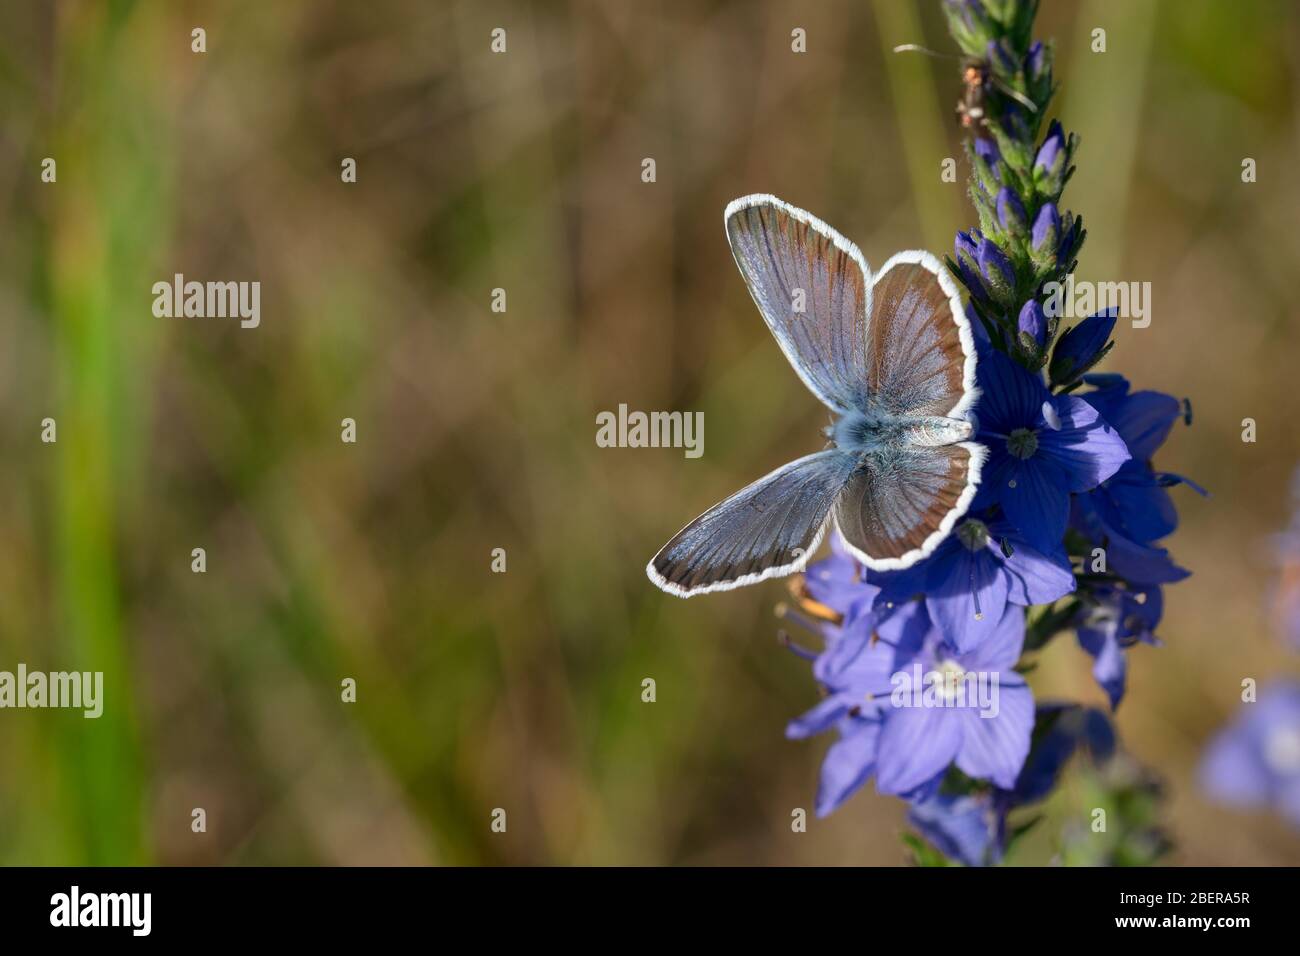 Butterfly polyommatus bellargus sits on a blue flower. The background is blurred. Close-up. Free space for text or image. Wildlife. Stock Photo